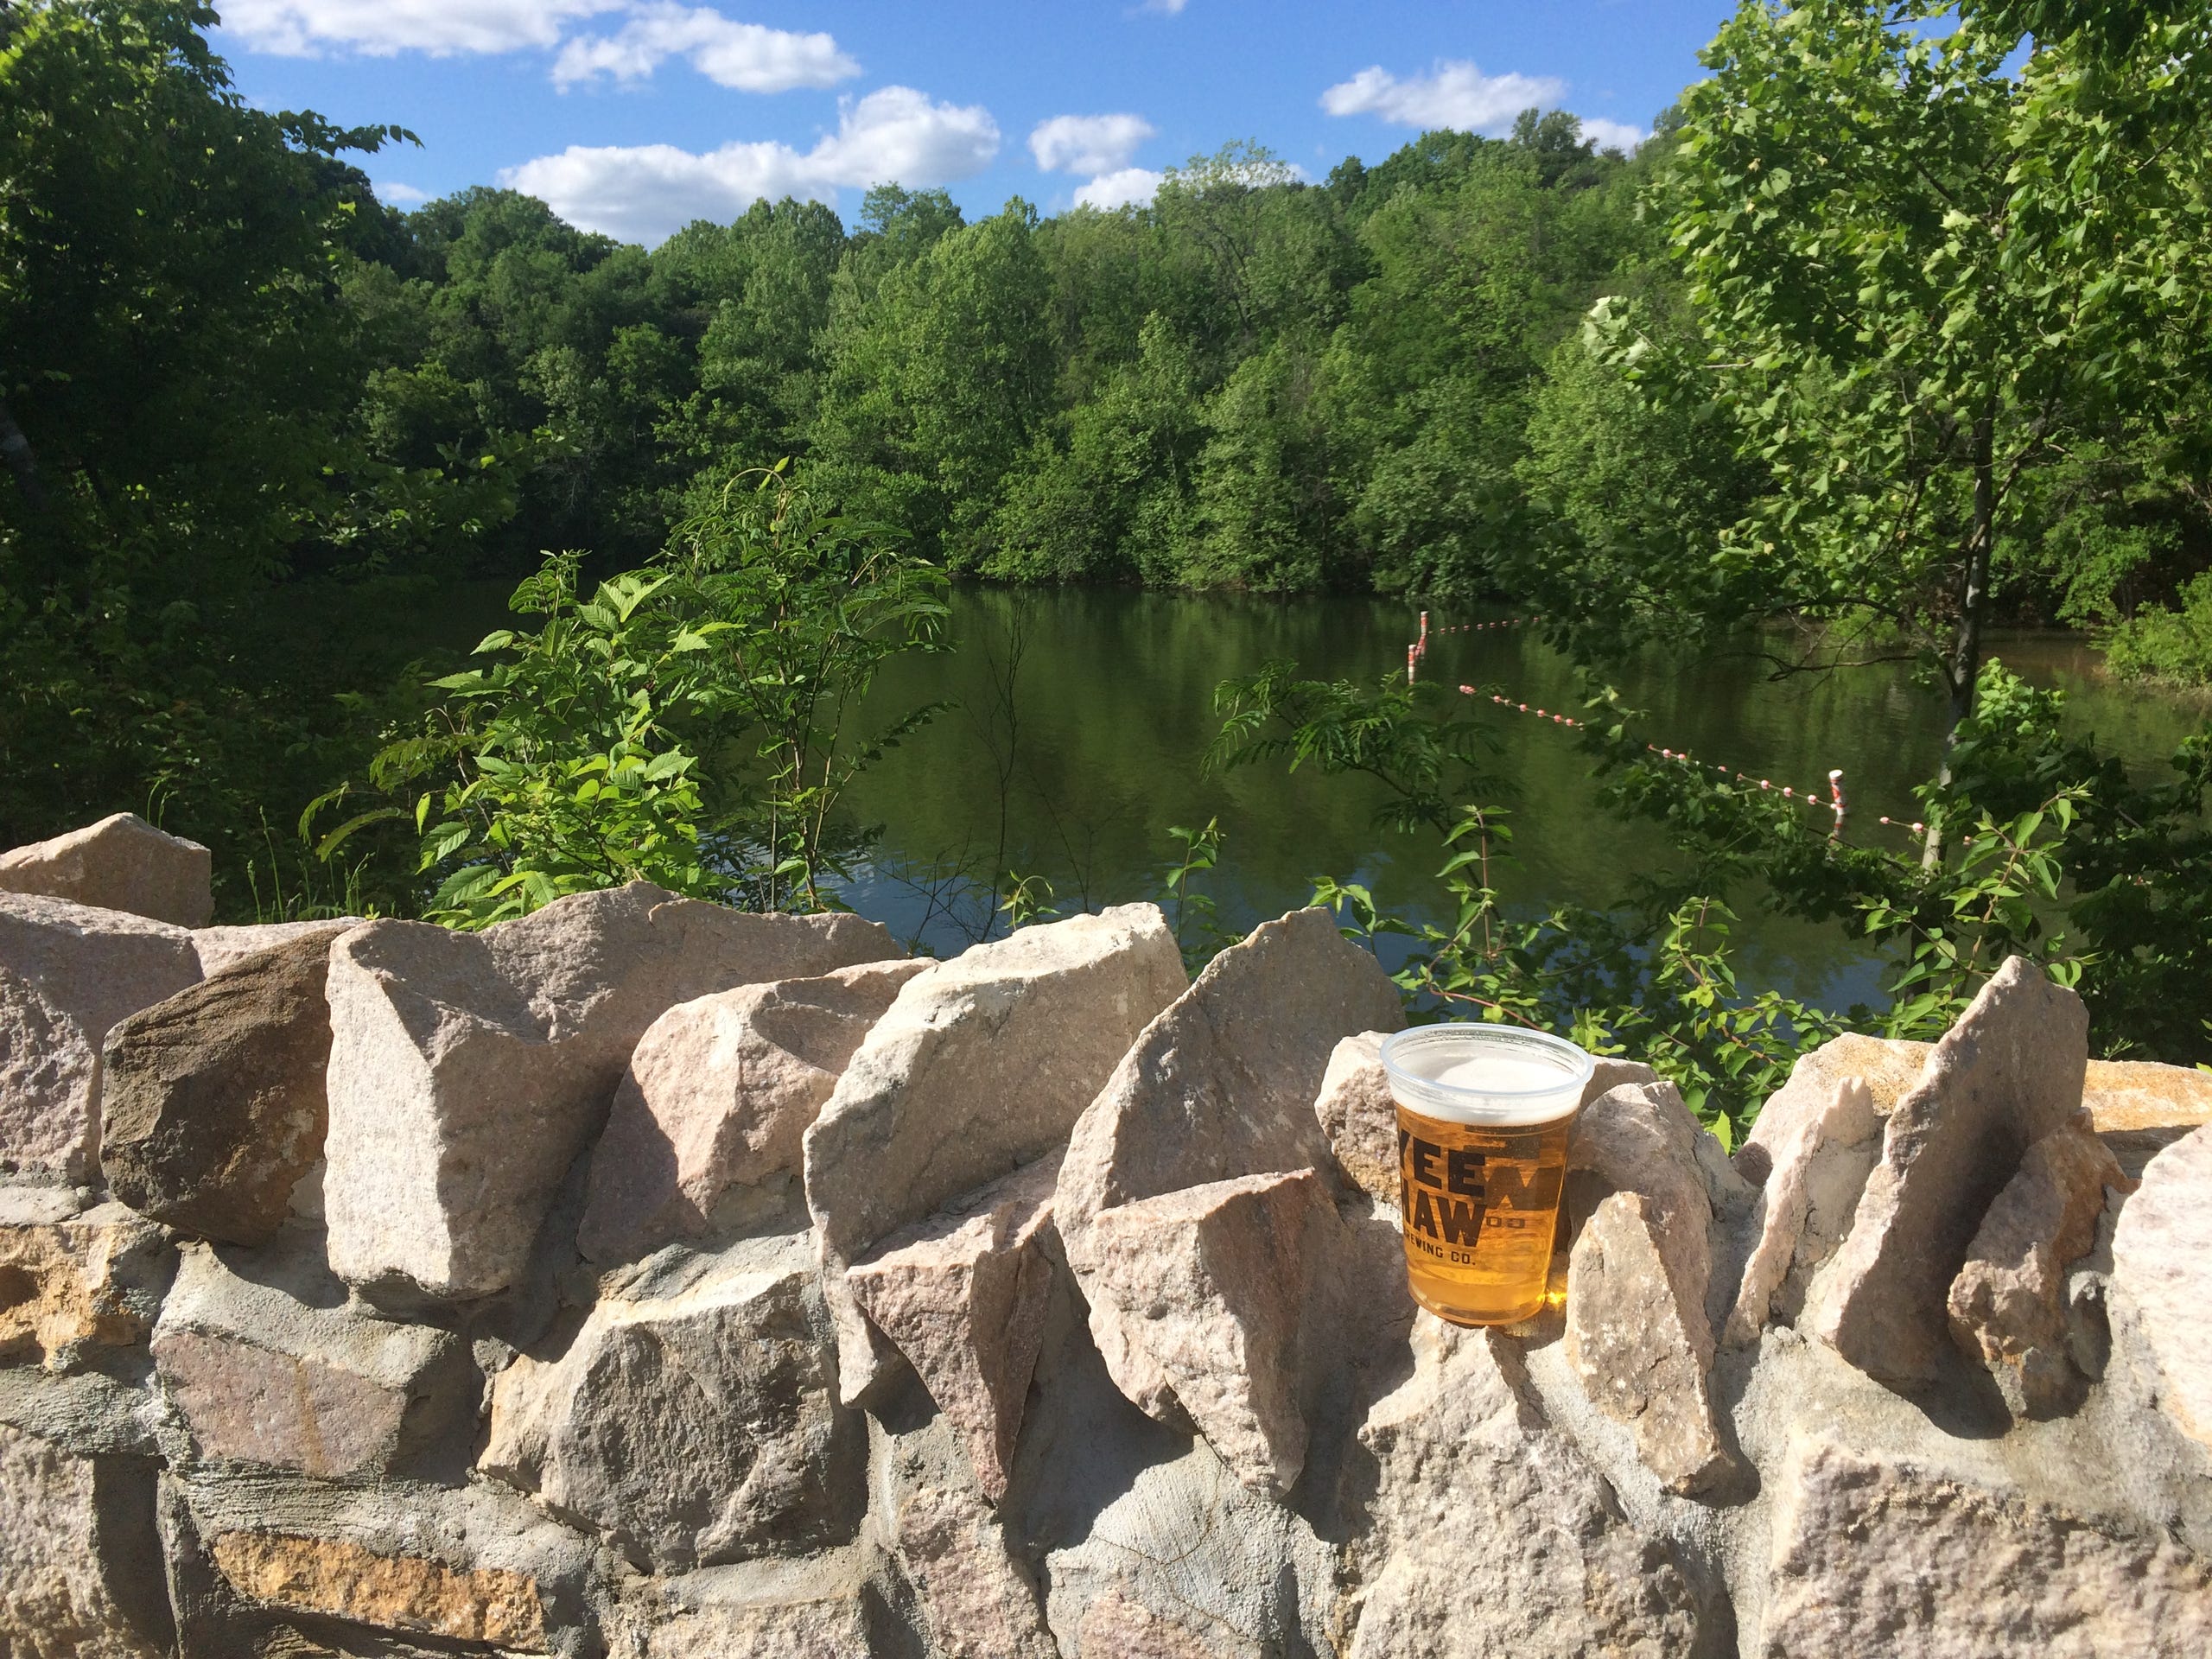 Yee Haw Brewing And Ijams Create Beer Garden At Mead S Quarry